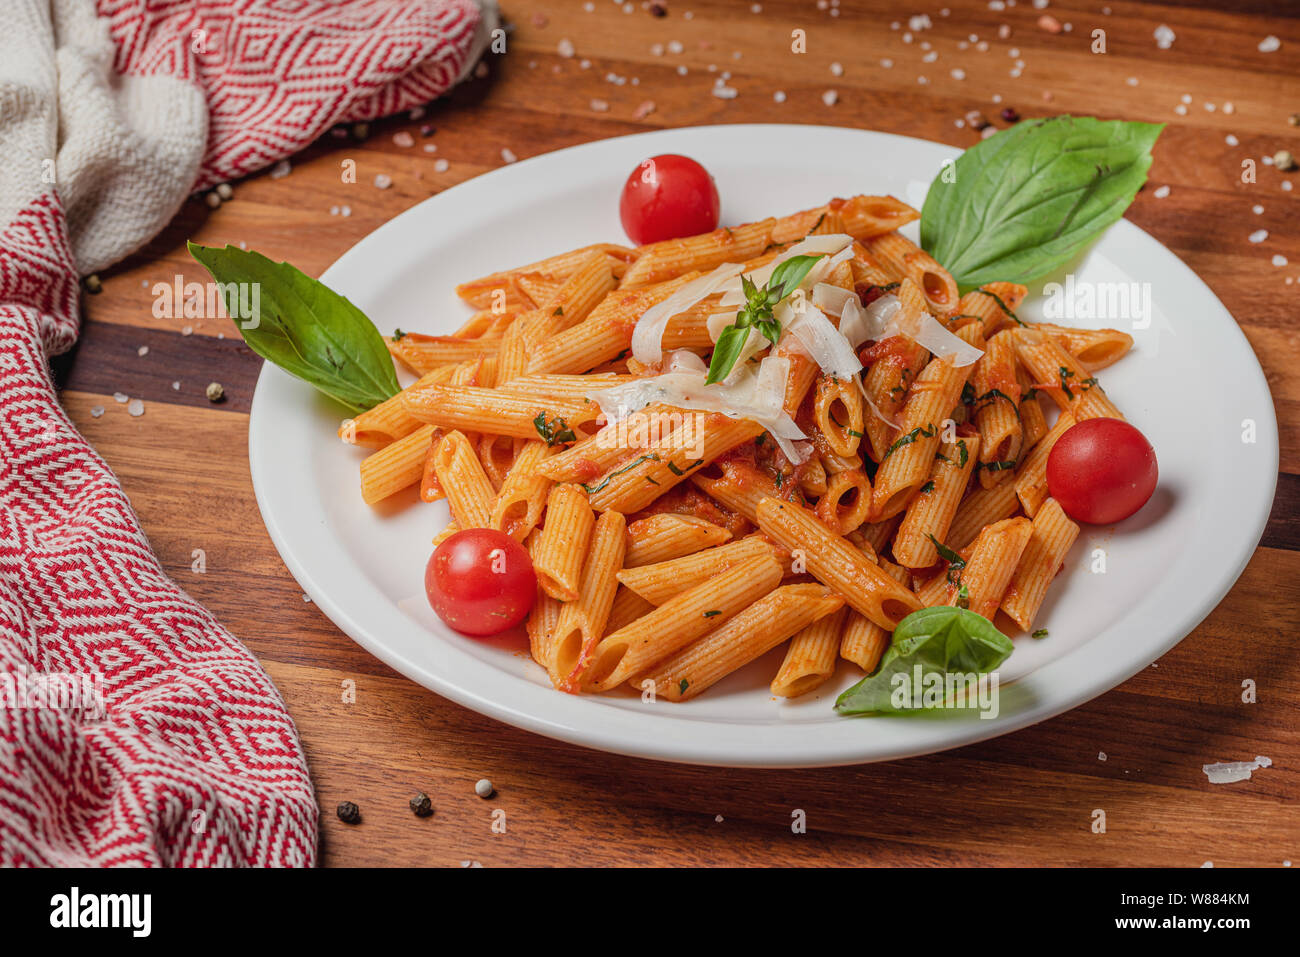 Pasta served with cheese on wooden table background Stock Photo